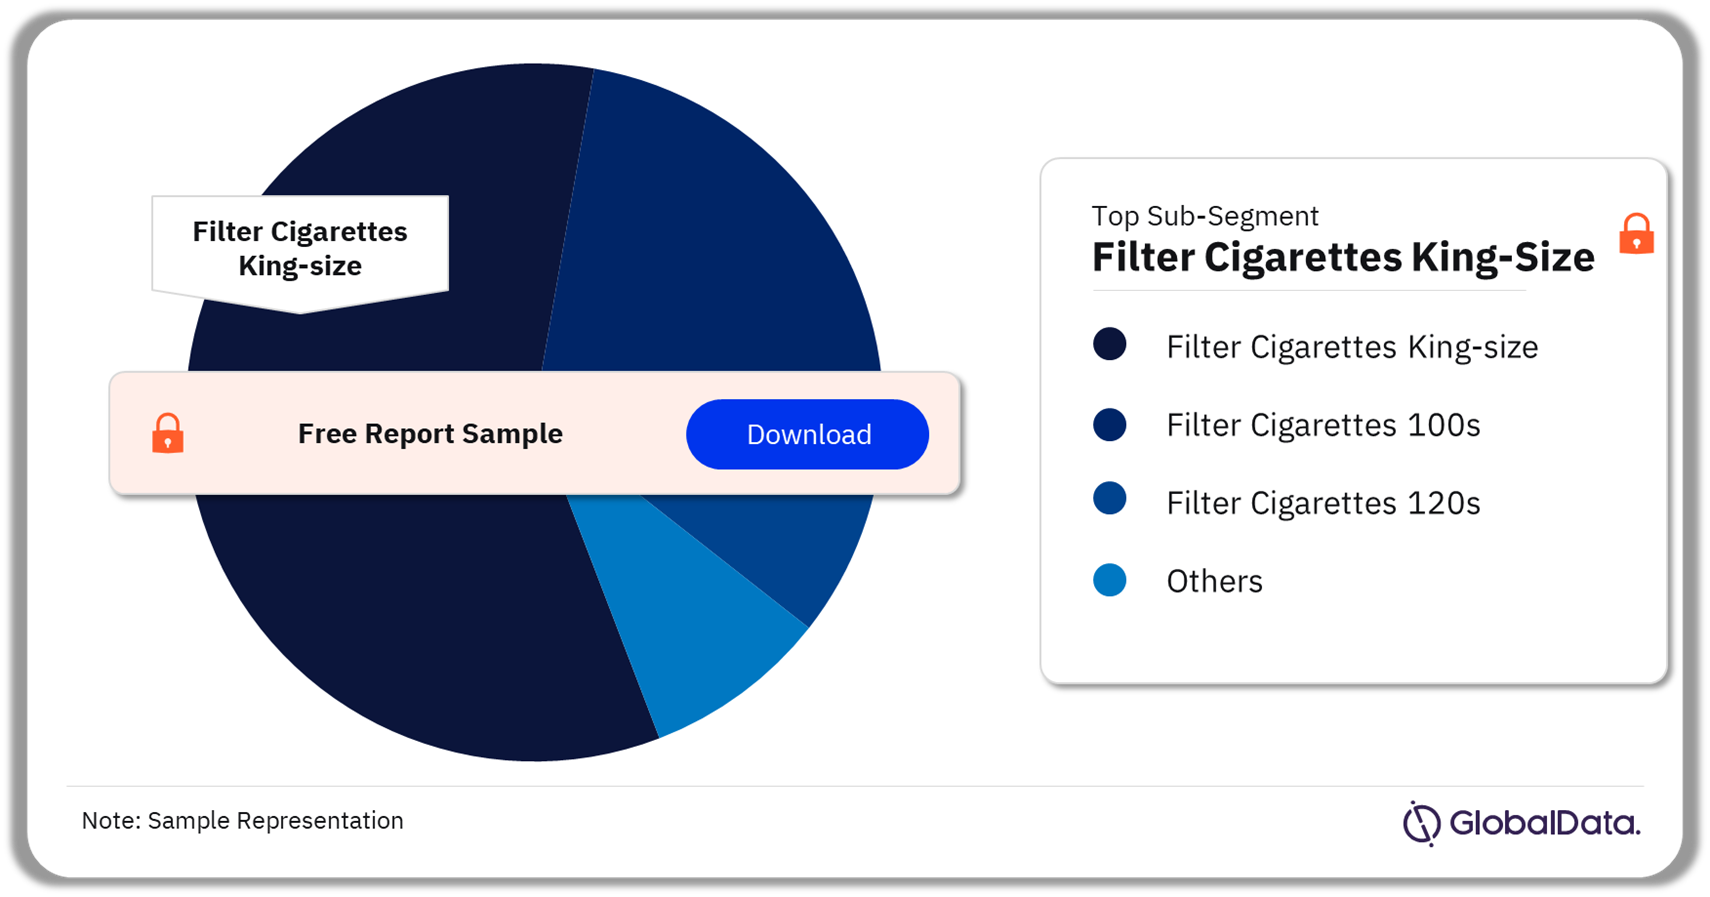 Finland Filter Cigarettes Market Analysis by Sub-Segments, 2022 (%)